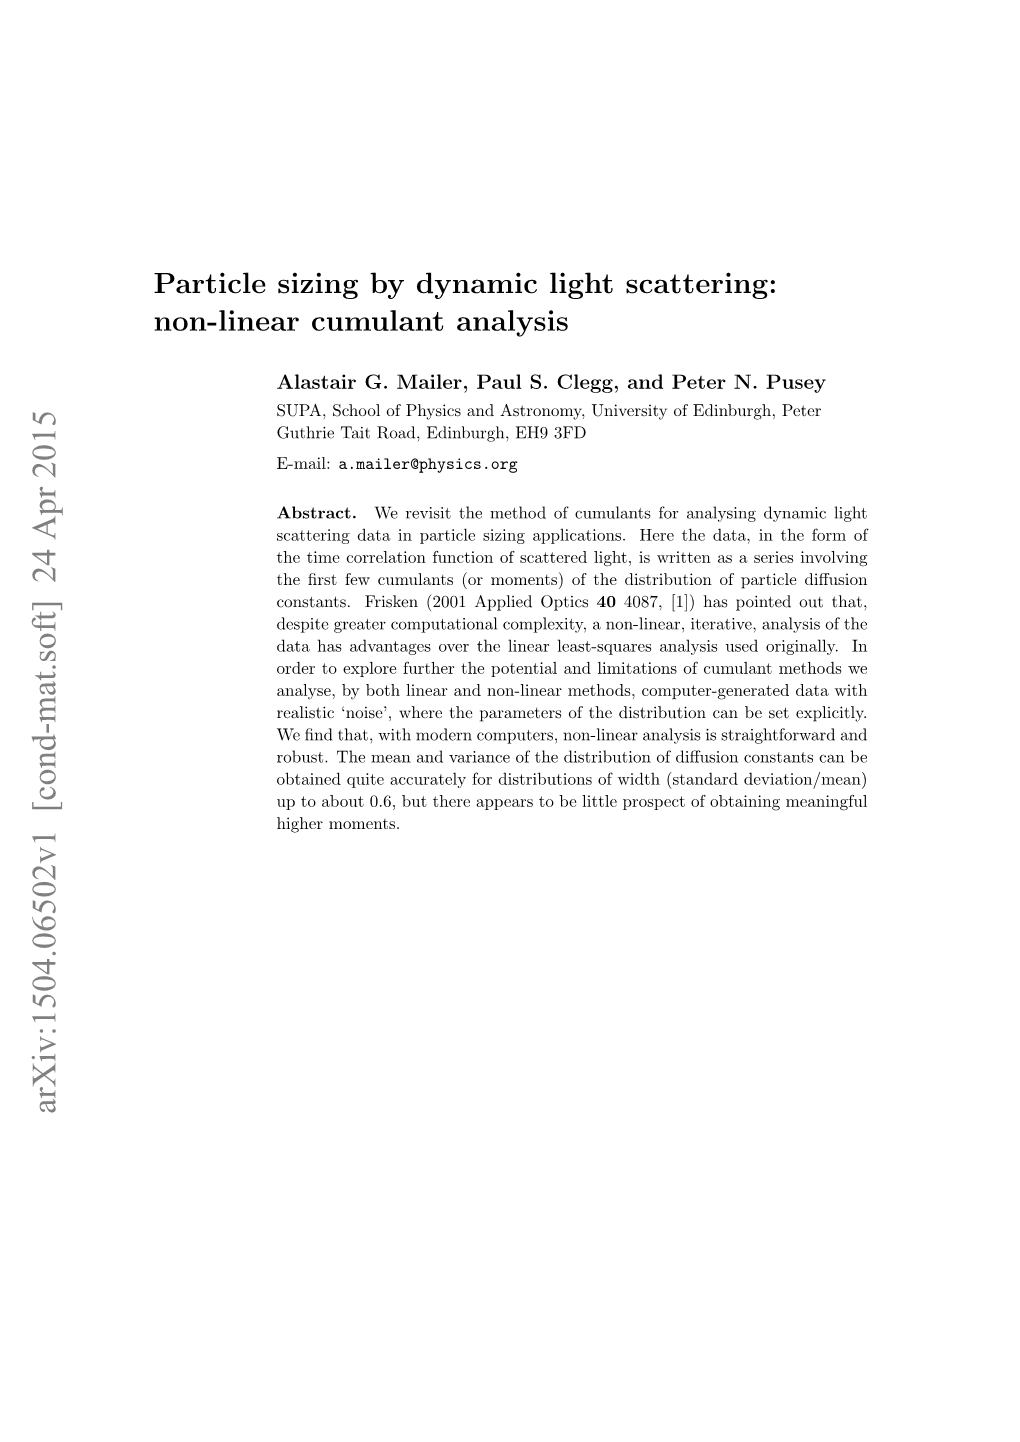 Particle Sizing by Dynamic Light Scattering: Non-Linear Cumulant Analysis